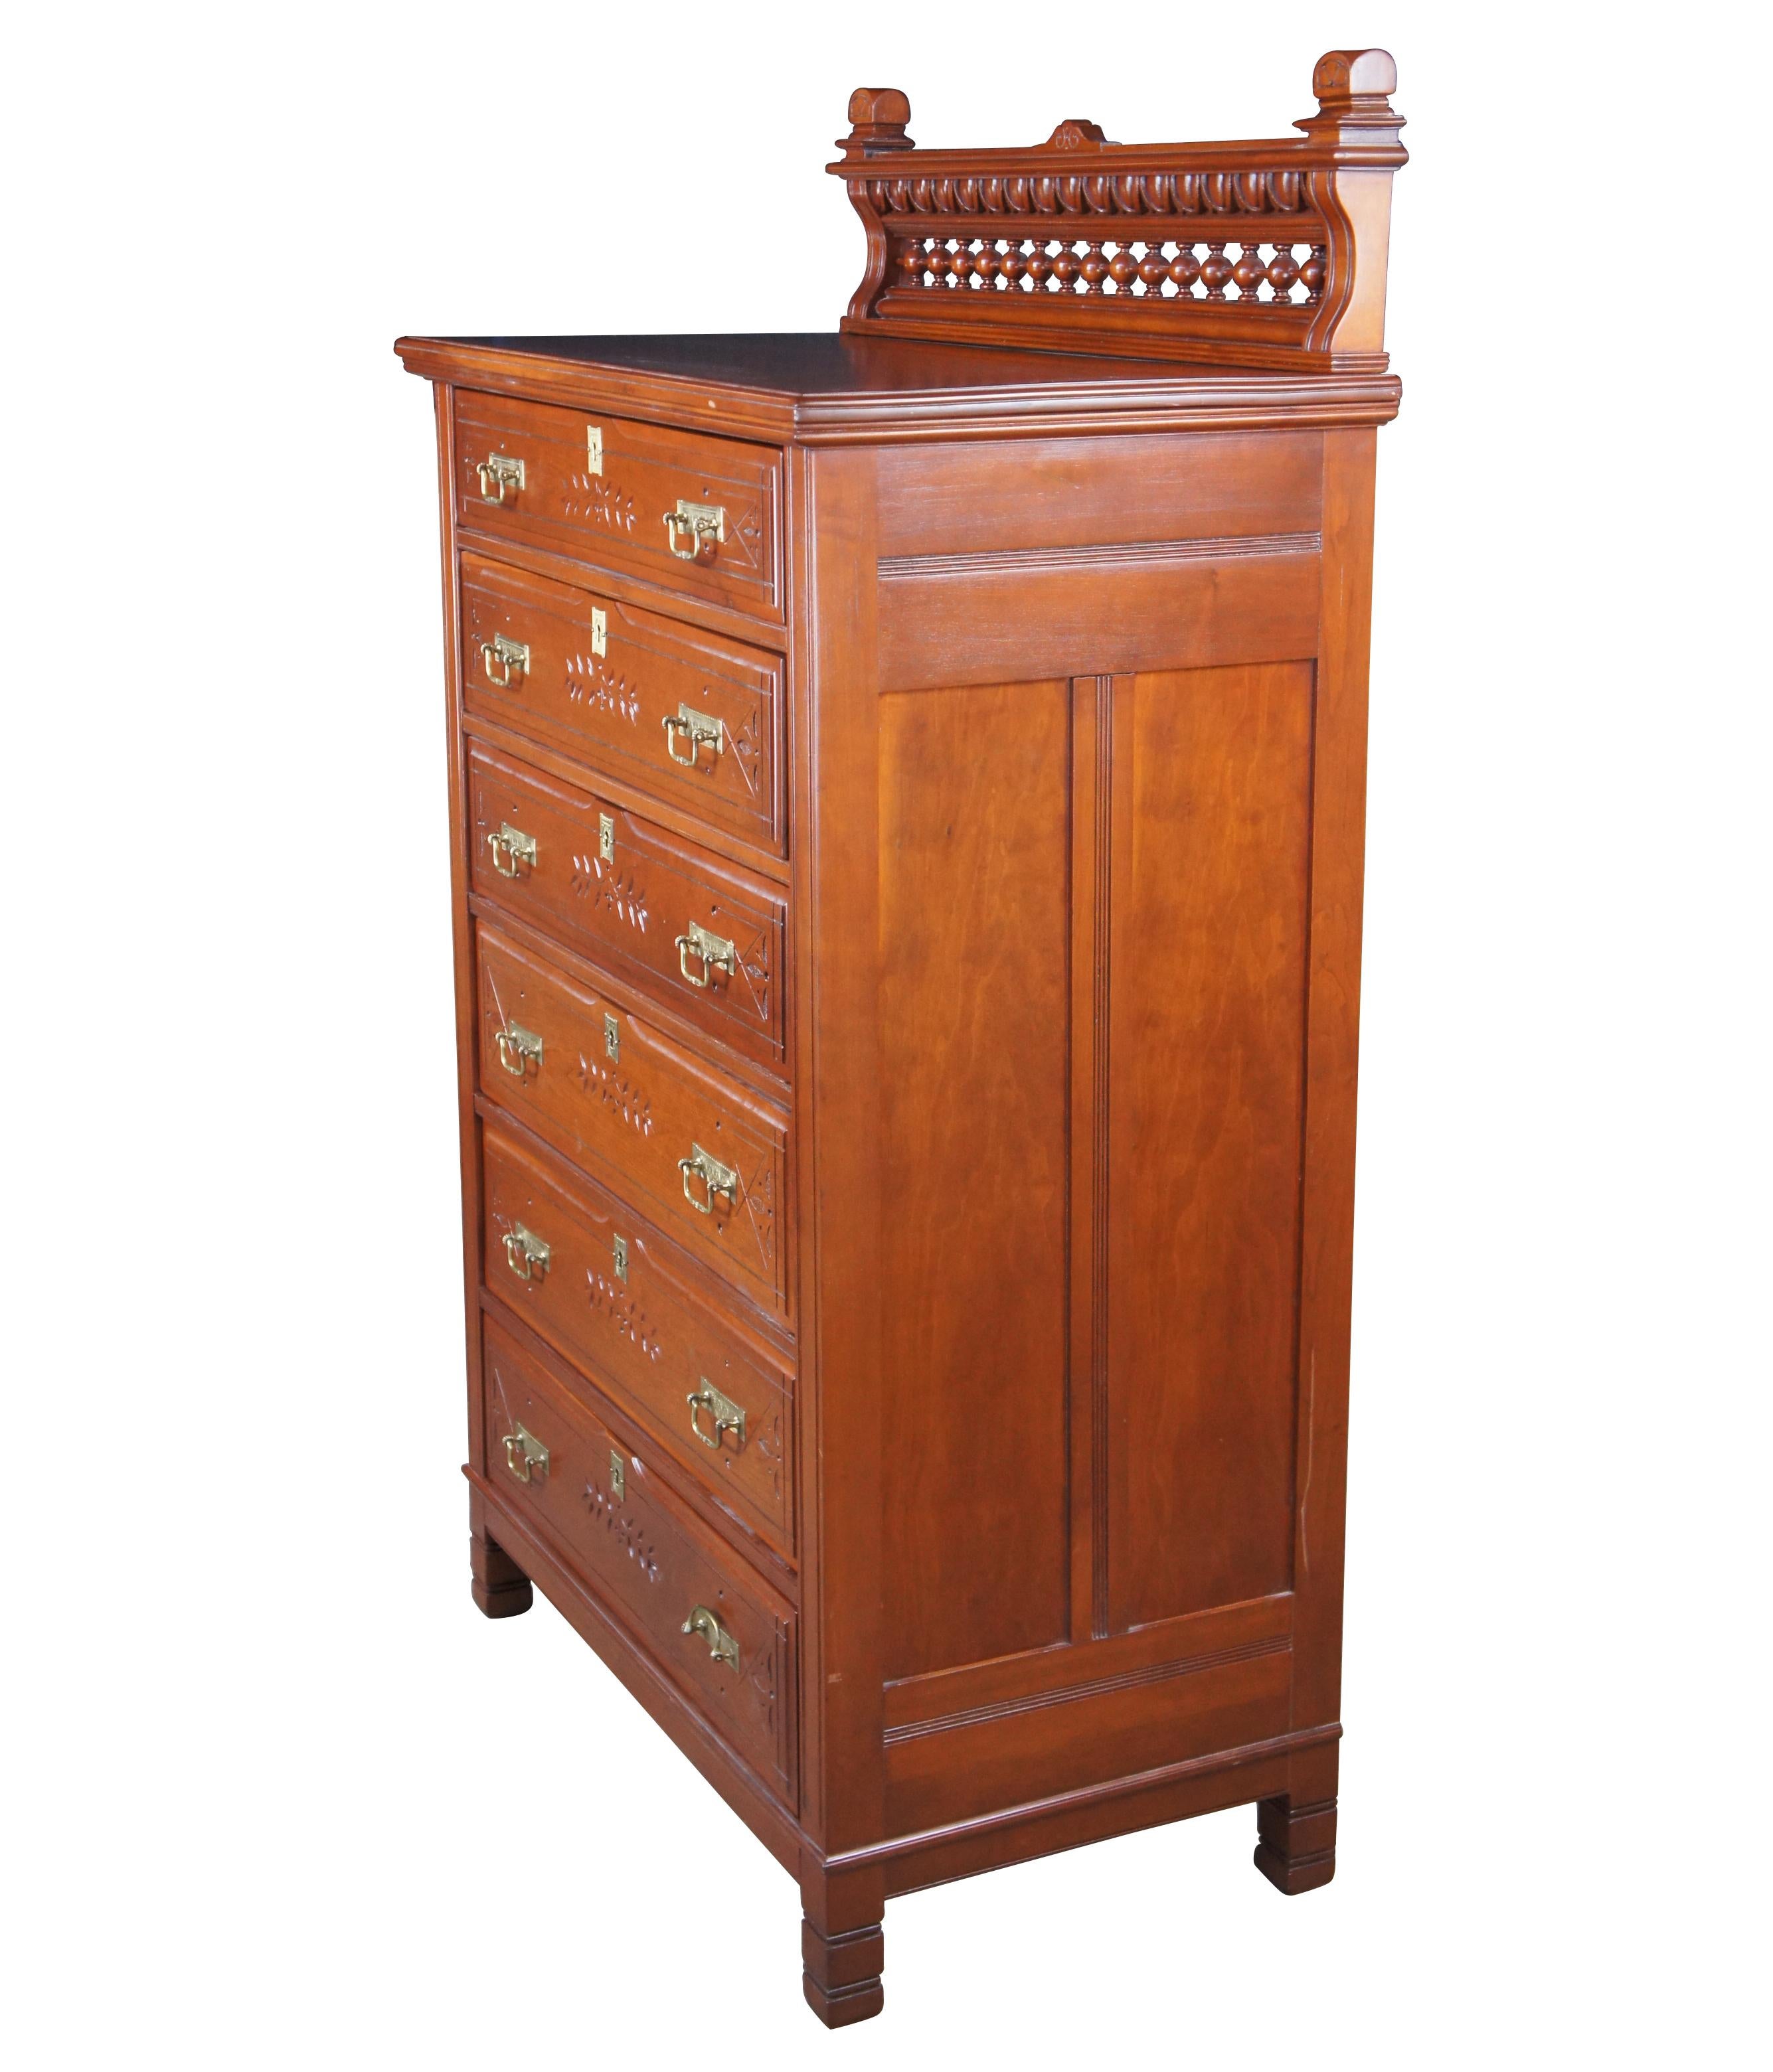 Impressive 19th century cherry highboy dresser, circa 1880s.  Features 6 dovetailed drawers, carved with leaf and vine motif, ornate brass bale hardware and matching escutcheon plates.  Stiles and drawer fronts have decorative shallow engraved lines